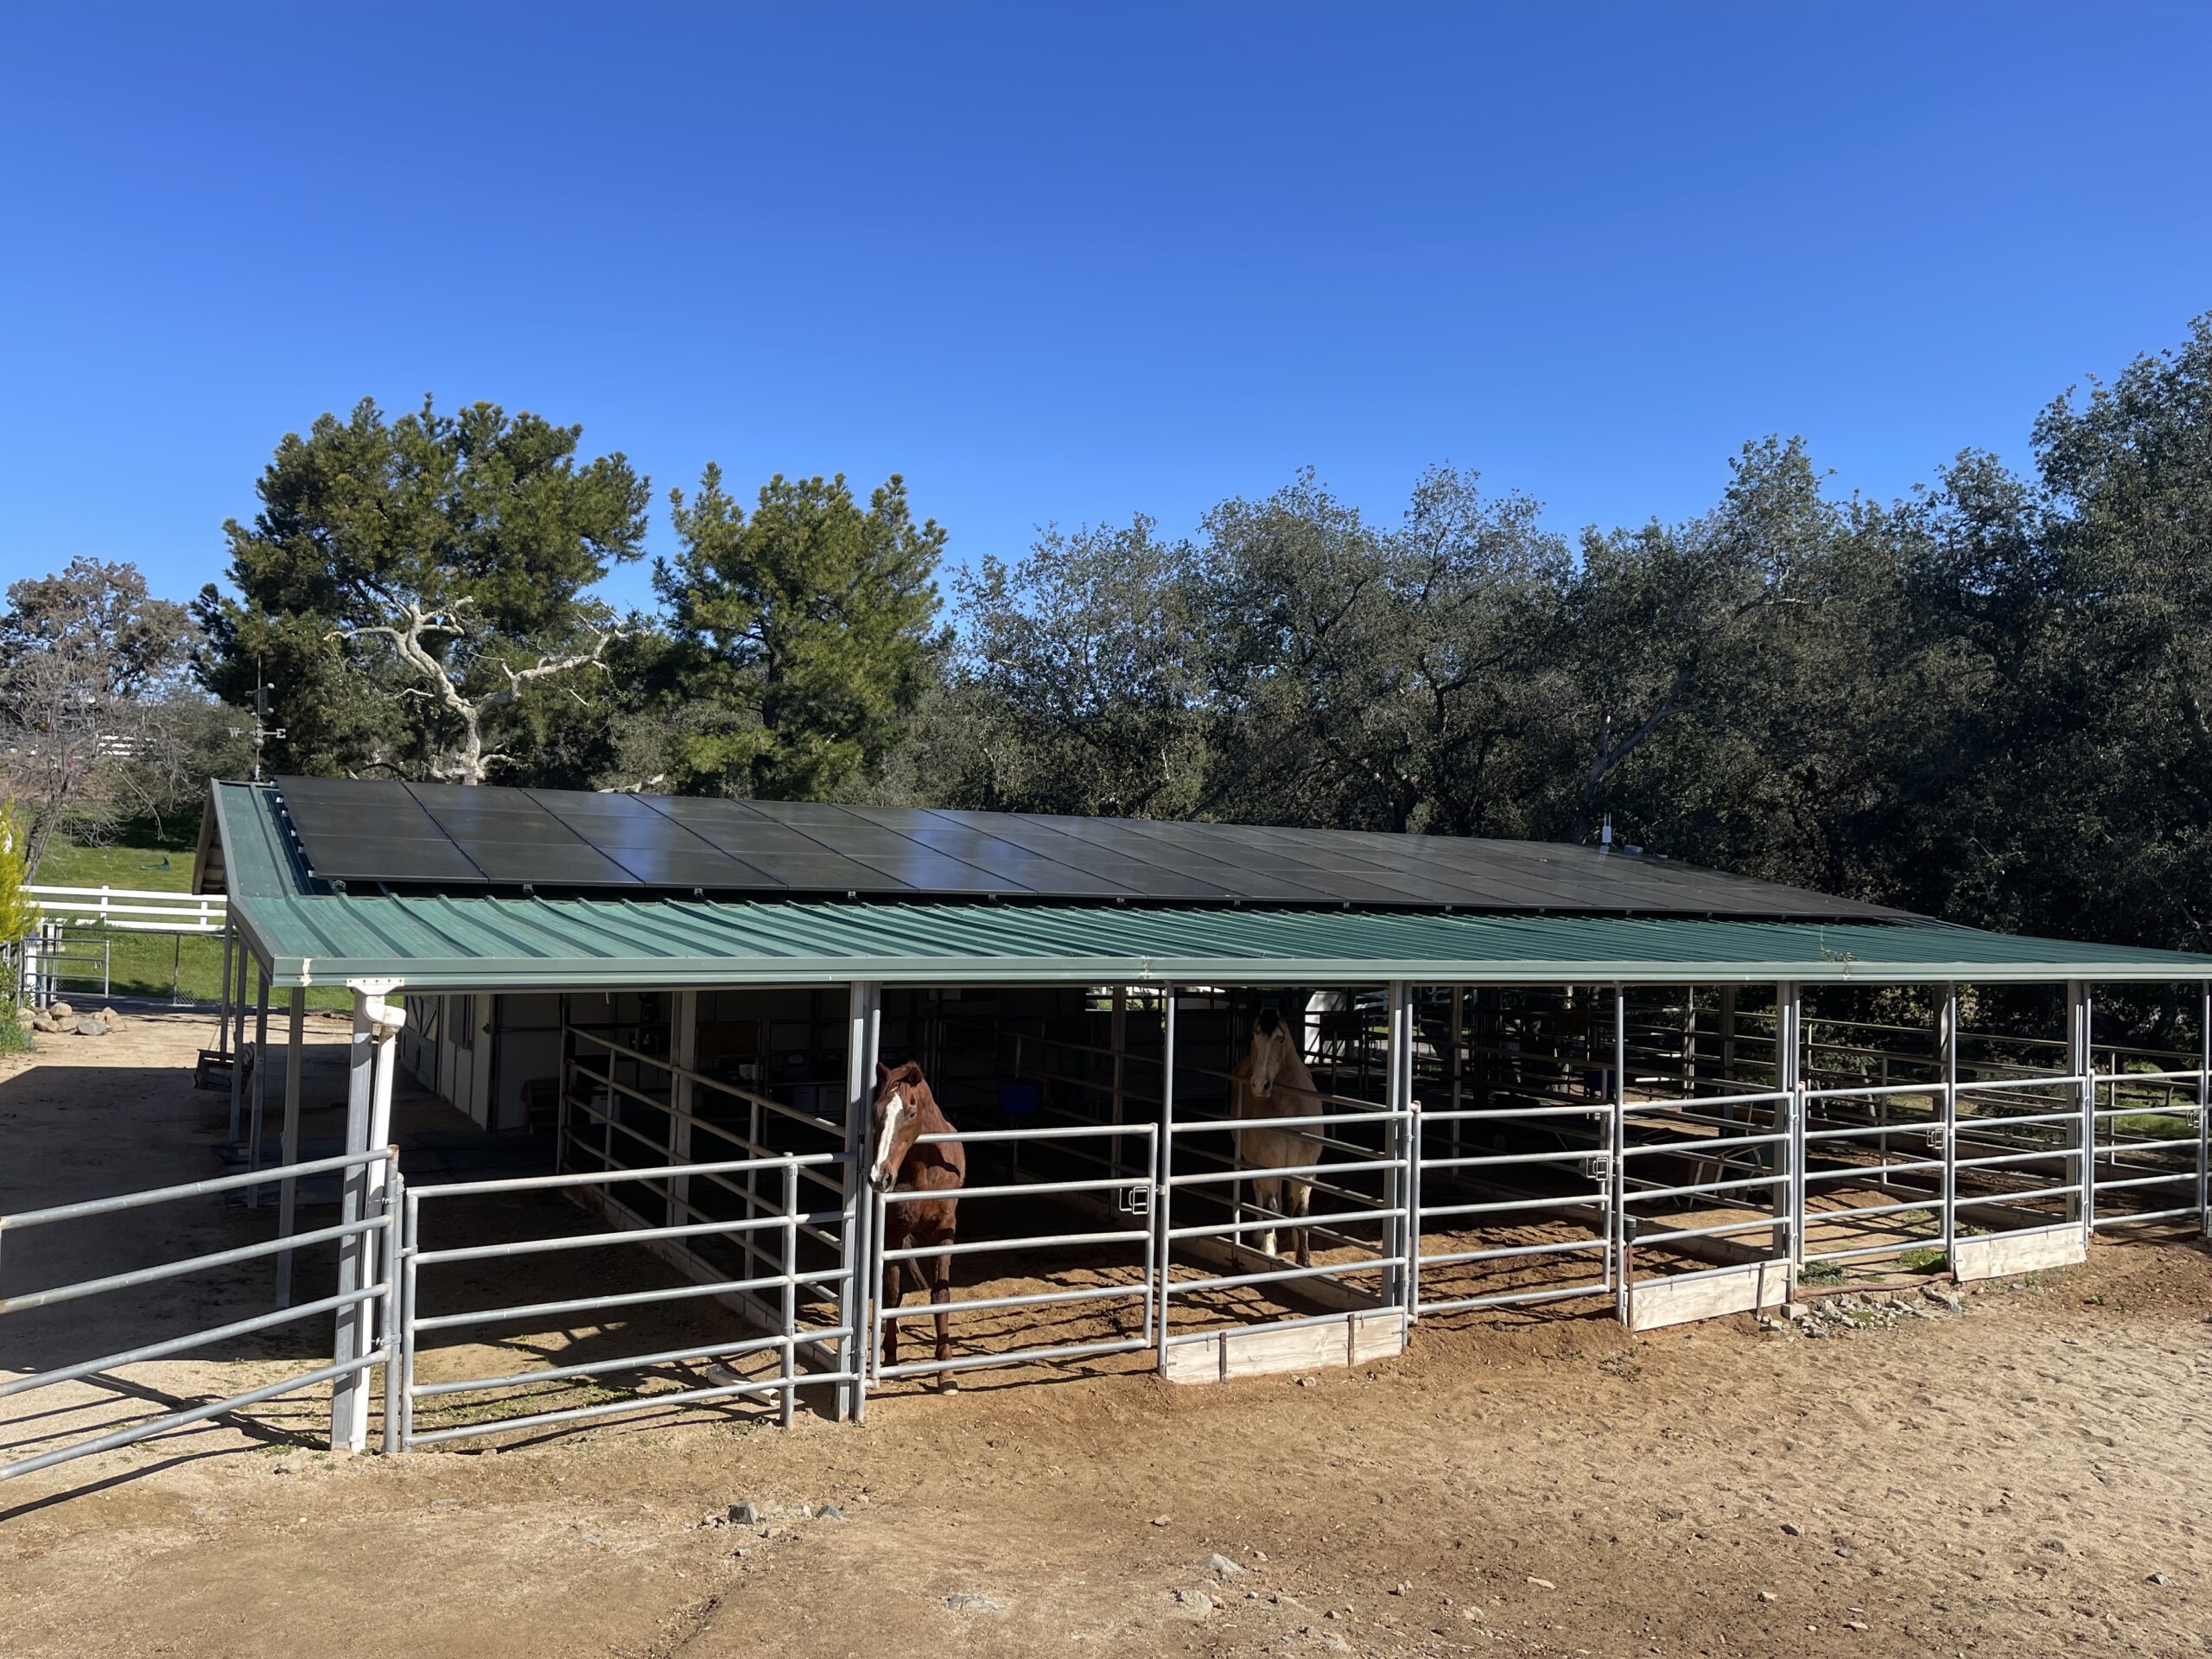 Stephens Family Solar Mounted on Horse Barn. This project is located in beautiful Menifee California and provides 100 percent of their electrical needs